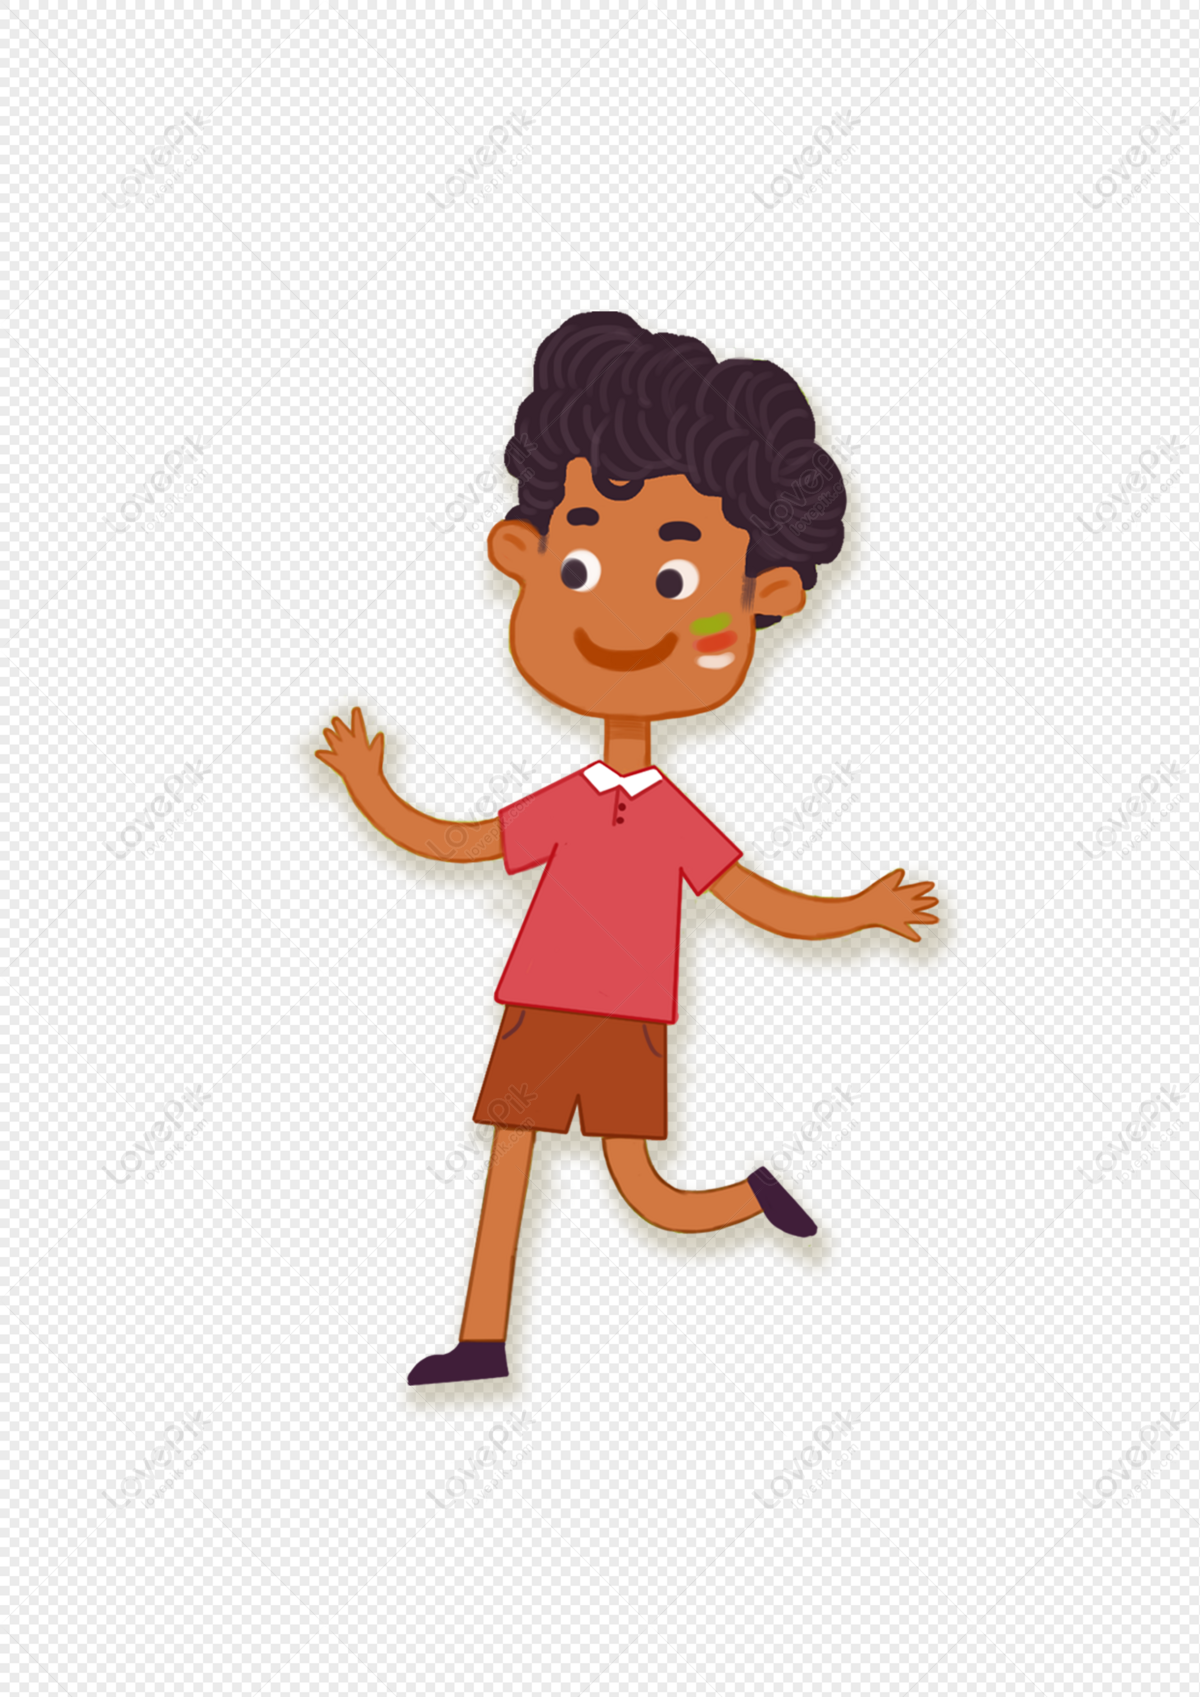 African Boy PNG Transparent And Clipart Image For Free Download - Lovepik |  400311846